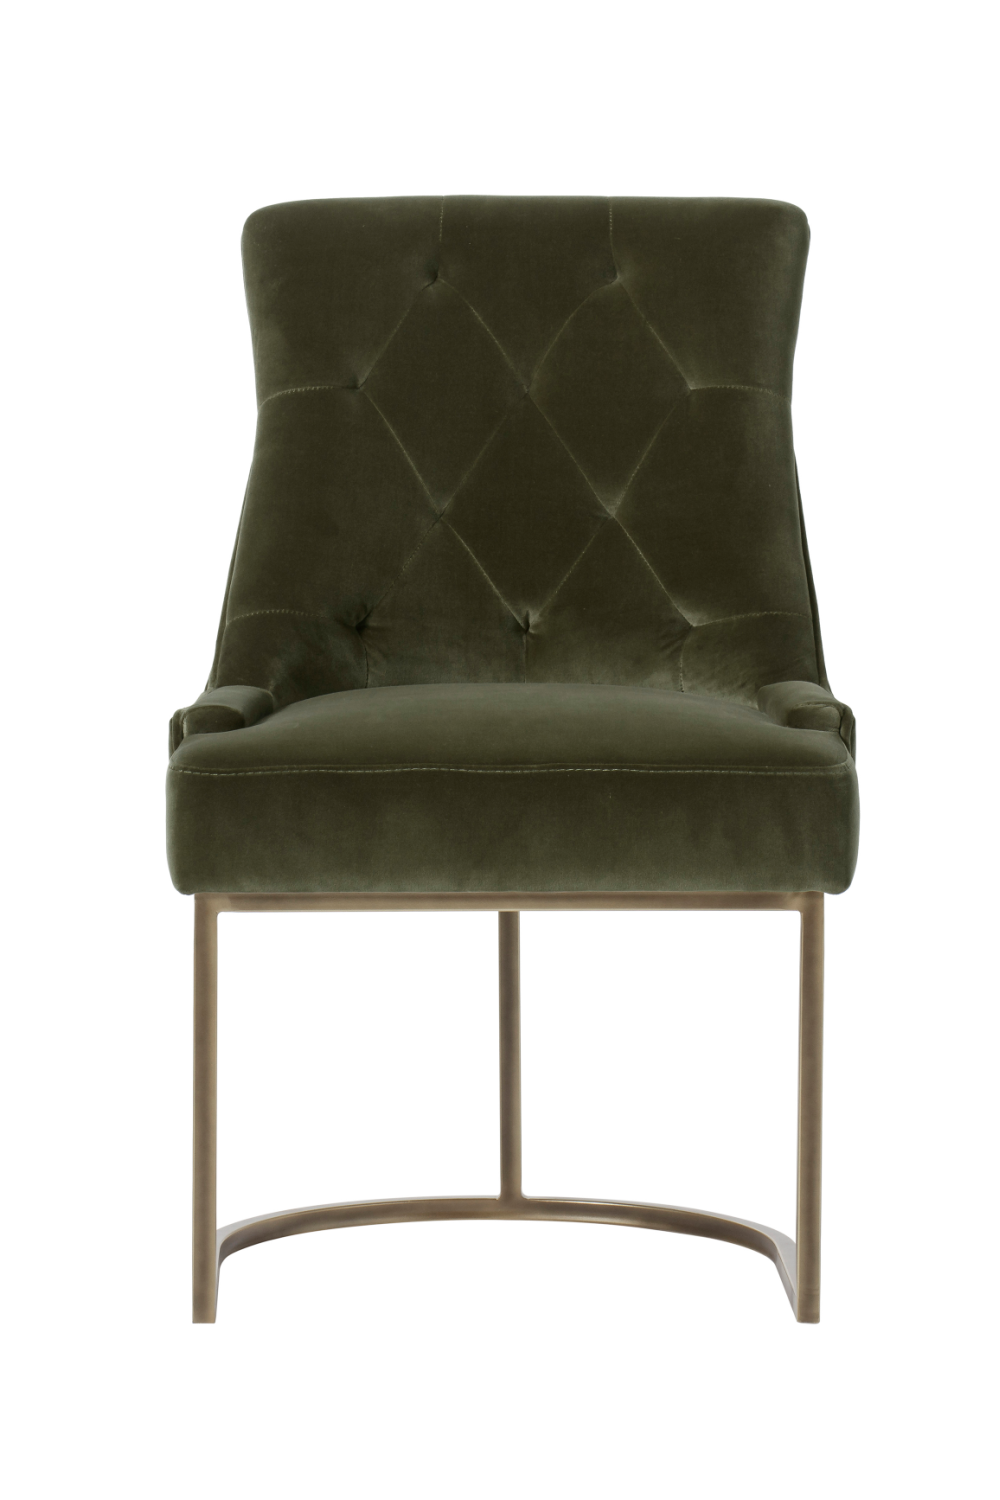 Aged Green Tufted Dining Chair | Andrew Martin Rupert | OROA